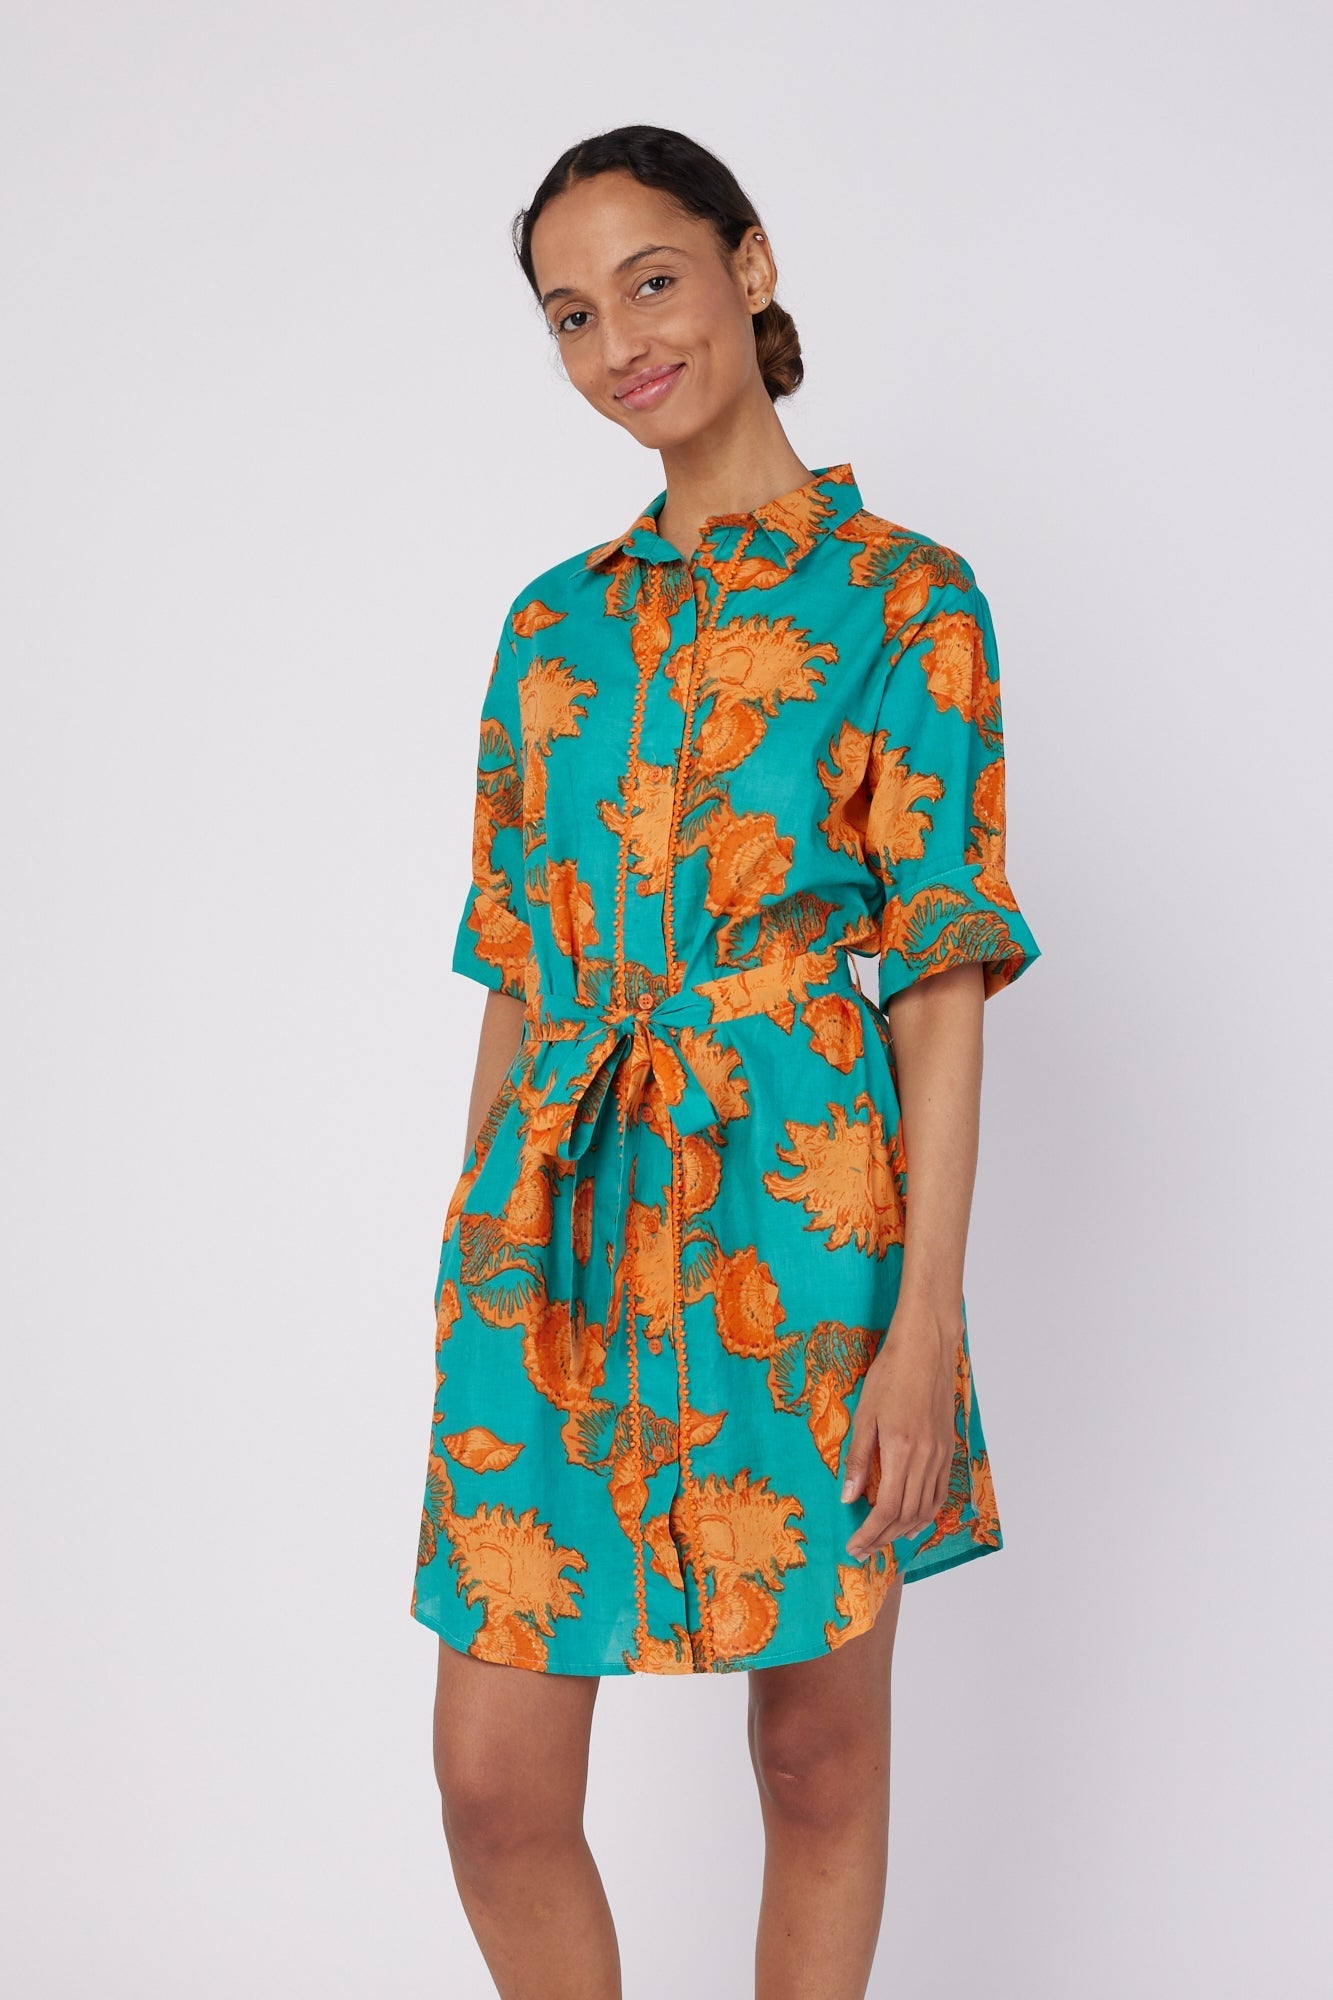 ModaPosa Carlotta 3/4 Sleeve Shirt Dress with Pockets and Detachable Belt in Turquoise Orange Shells . Discover women's resort dresses and lifestyle clothing inspired by the Mediterranean. Free worldwide shipping available!